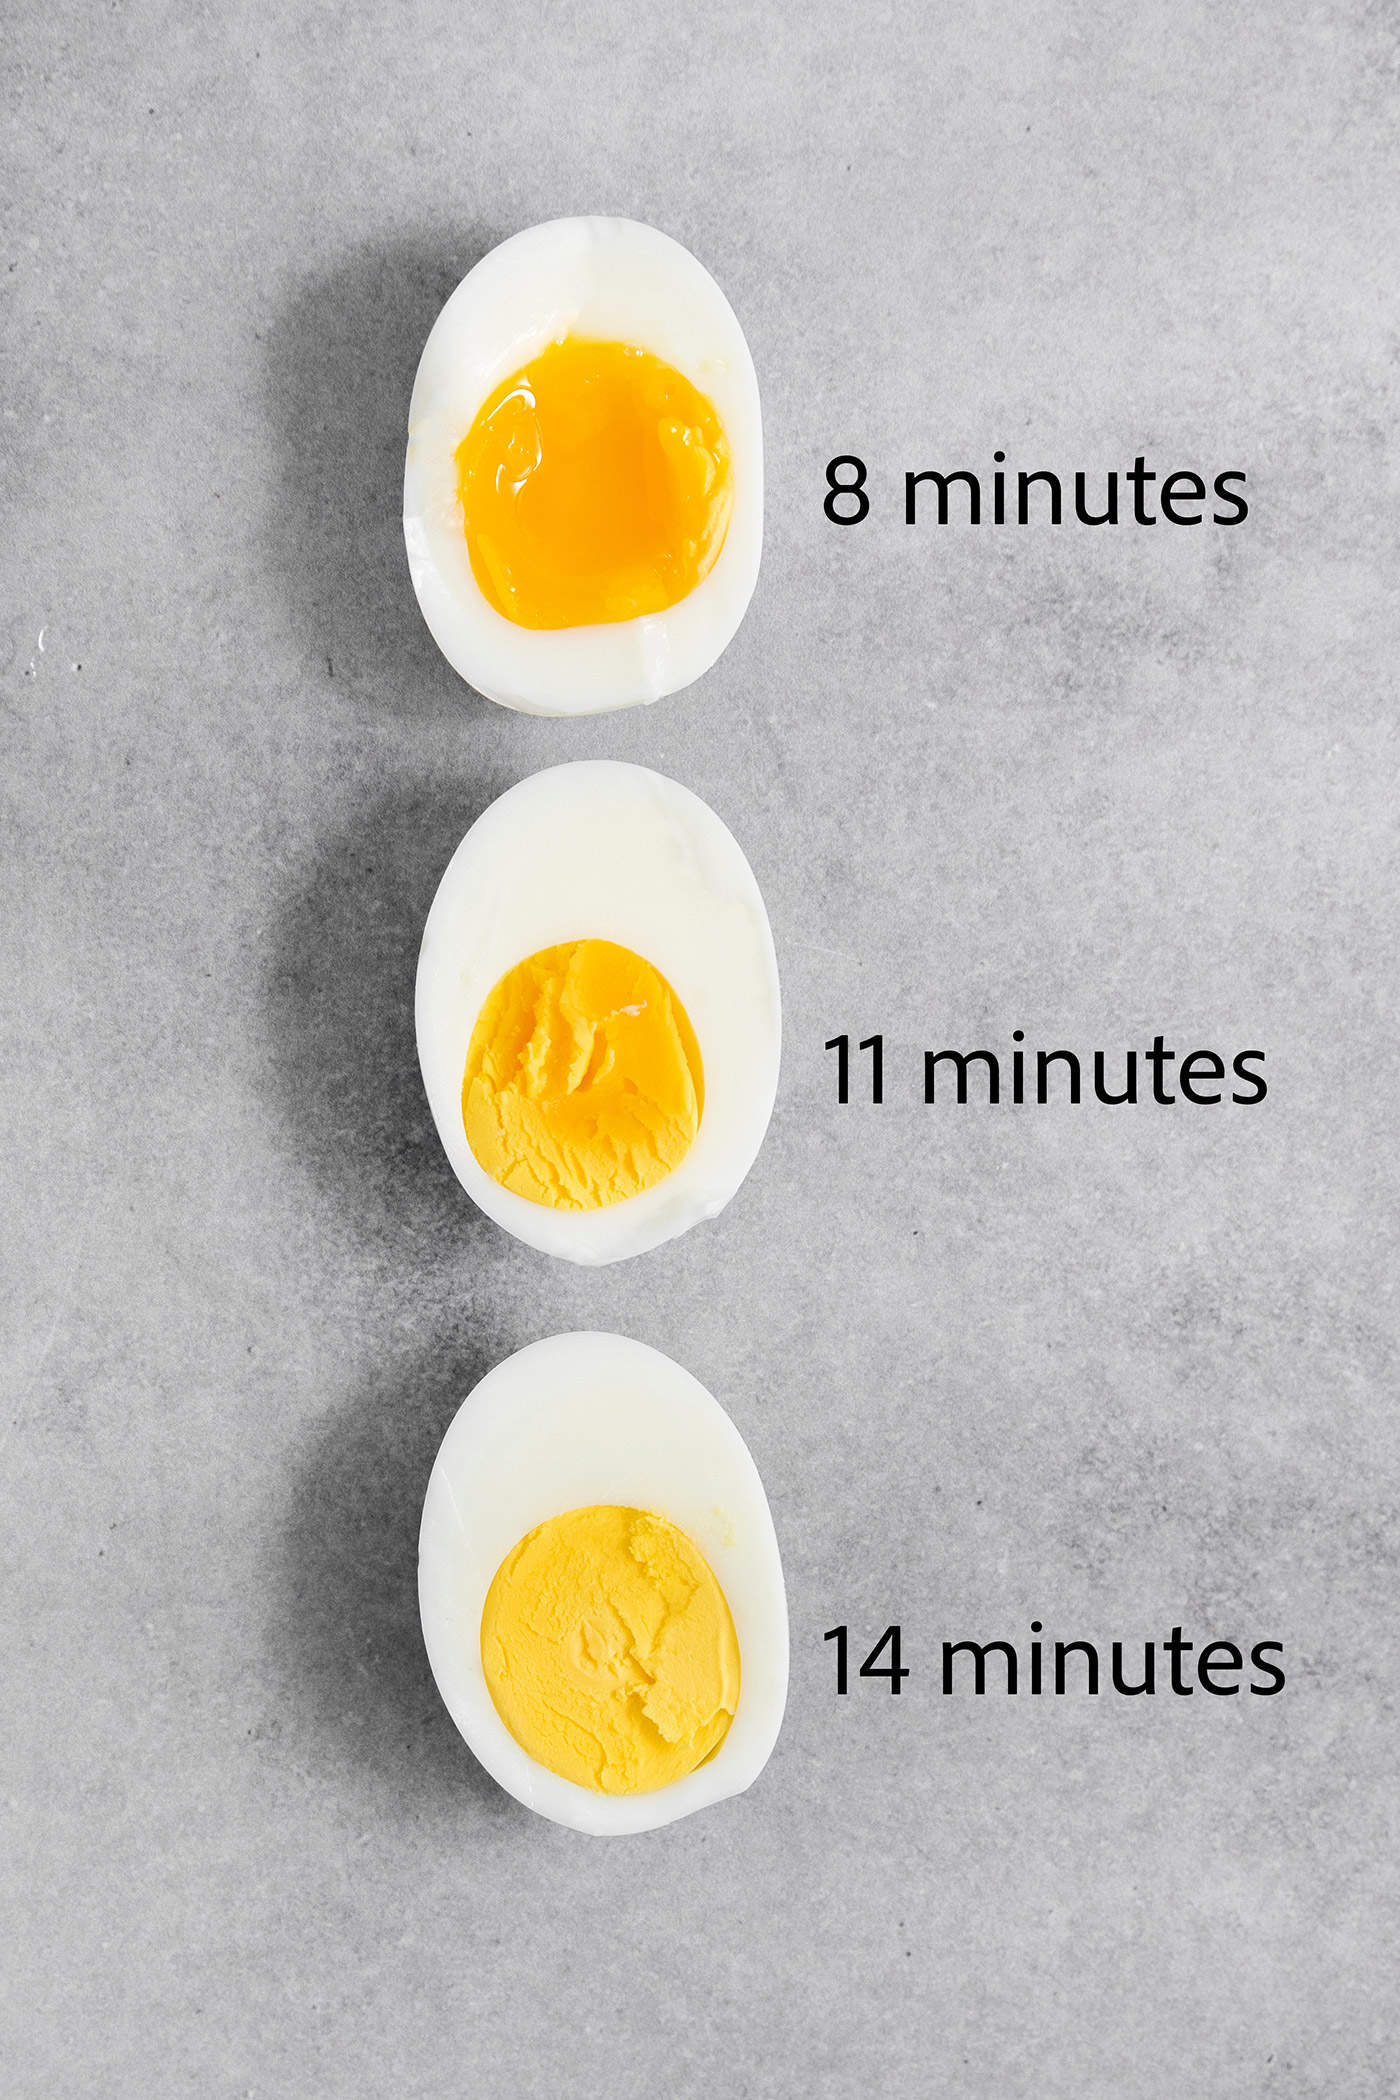 3 hard boiled eggs cut in half to show what the yolks look like with different cook times